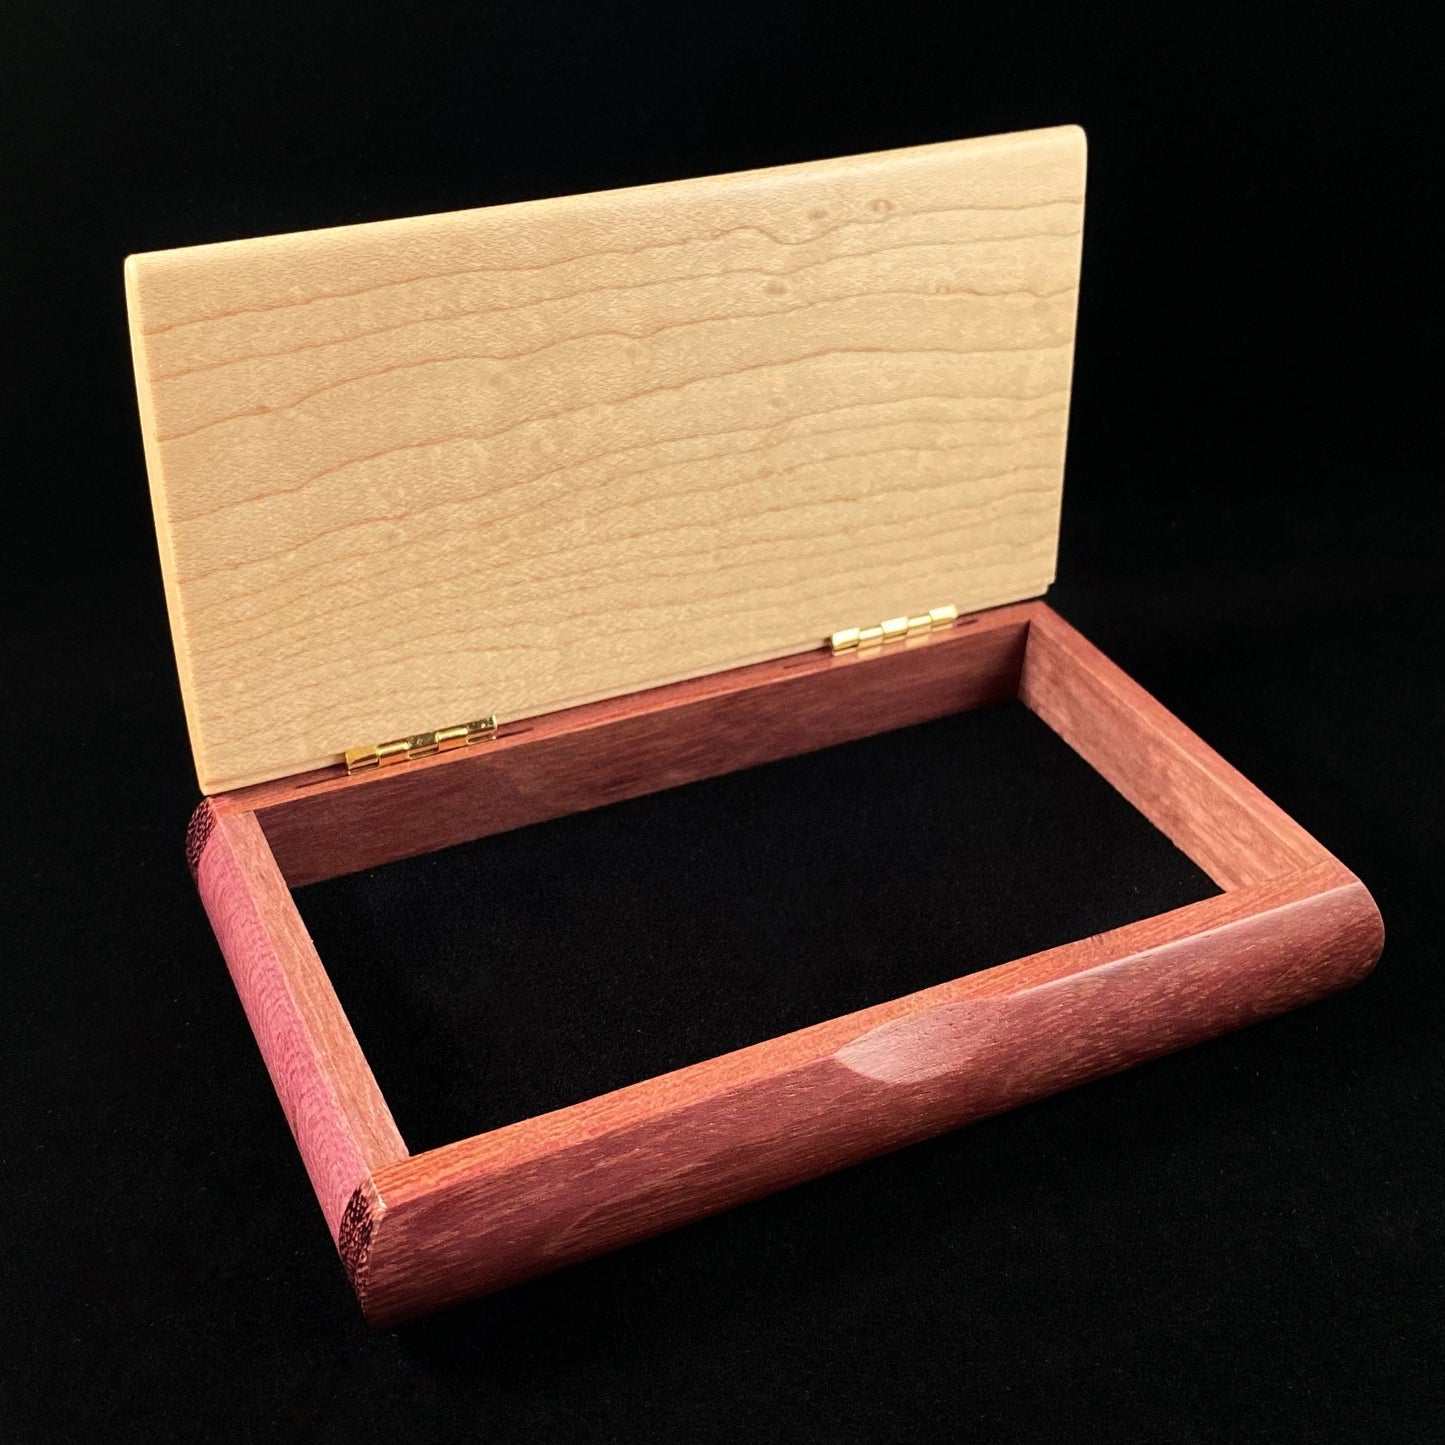 Great Lakes Handmade Wooden Box - Curly Maple and Purpleheart, Made in USA